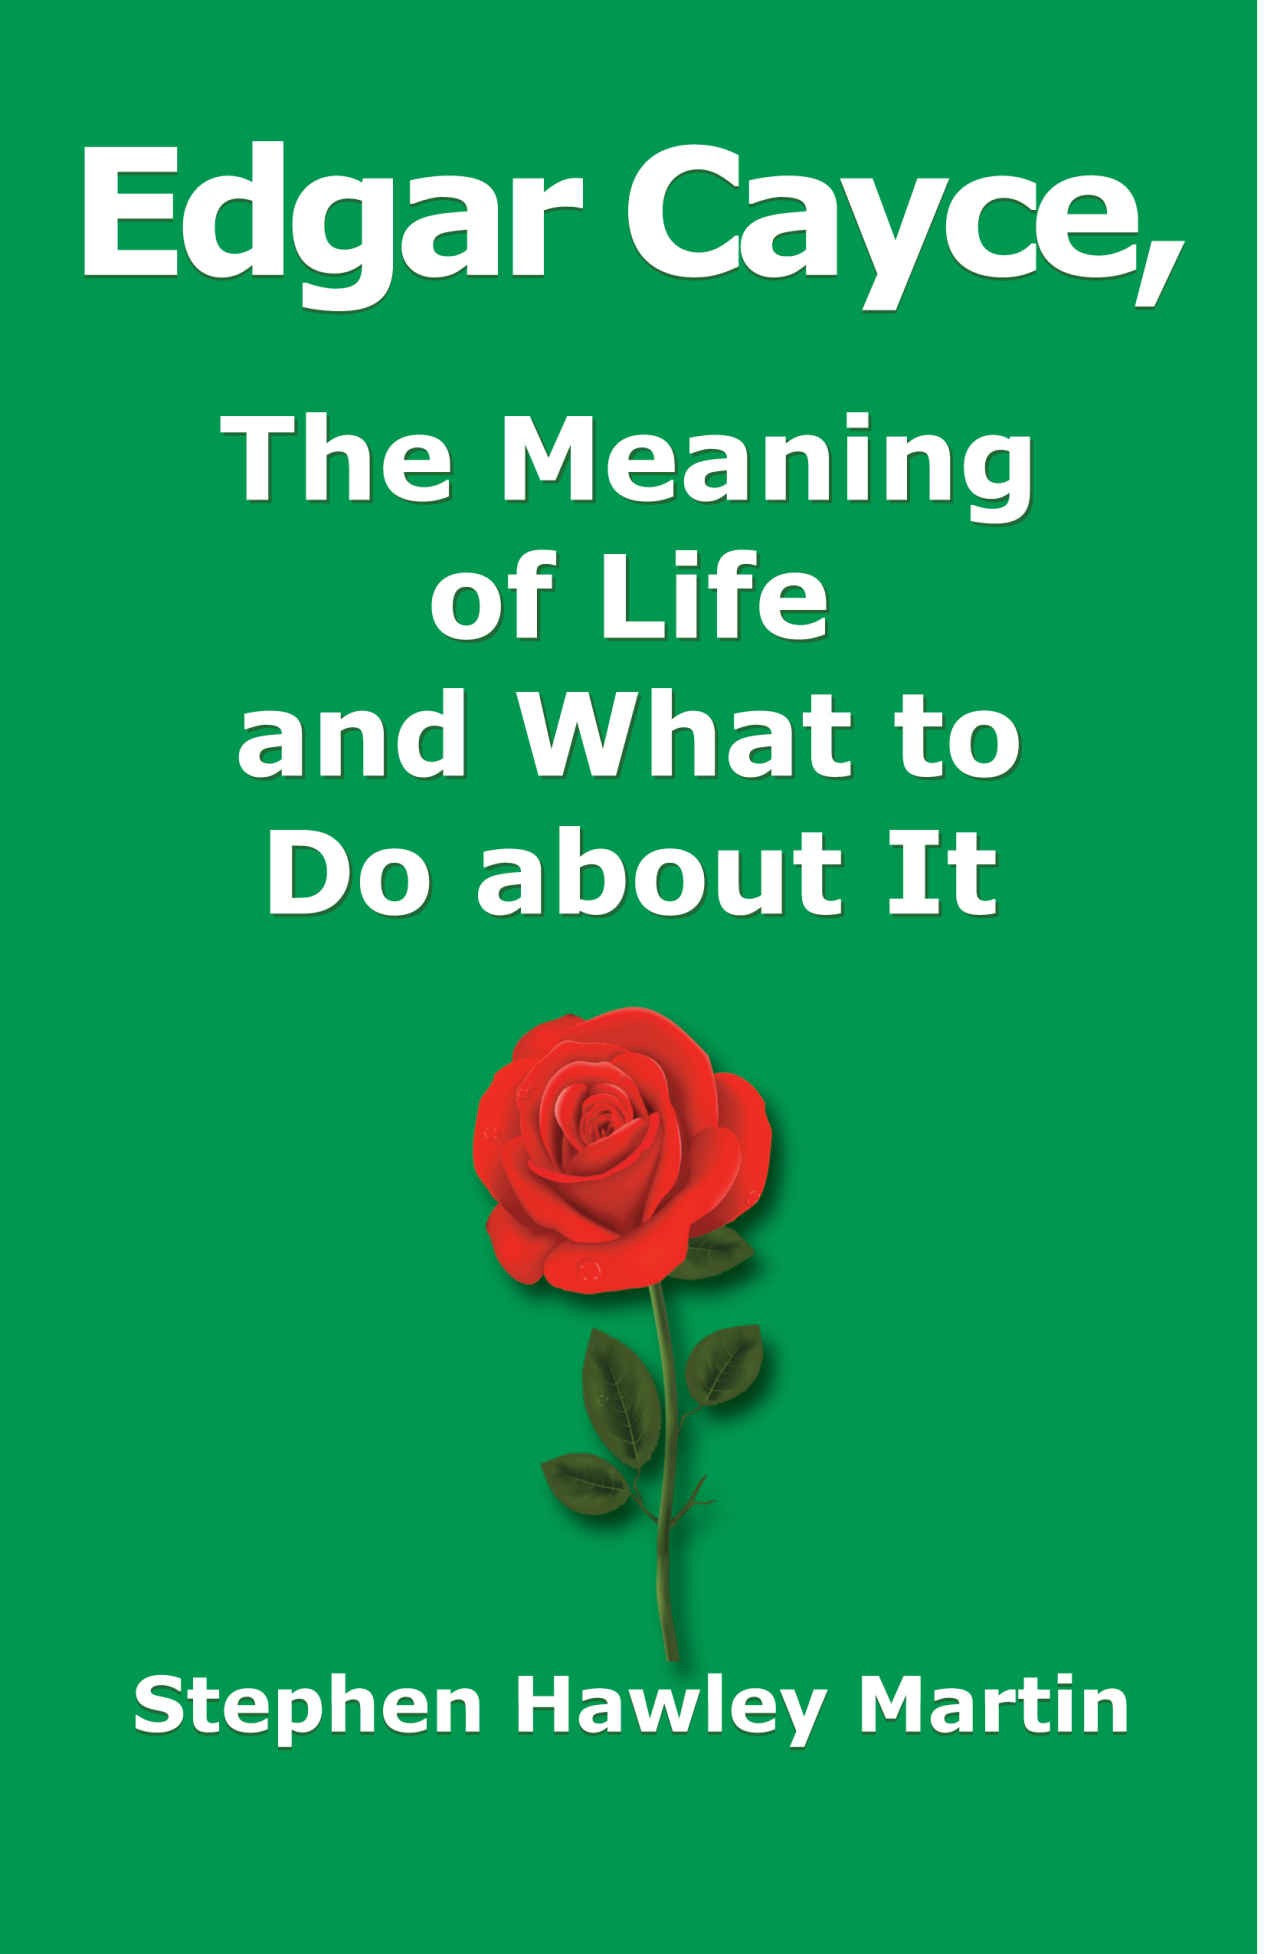 Edgar Cayce, the Meaning of Life and What to Do About It: Second Edition